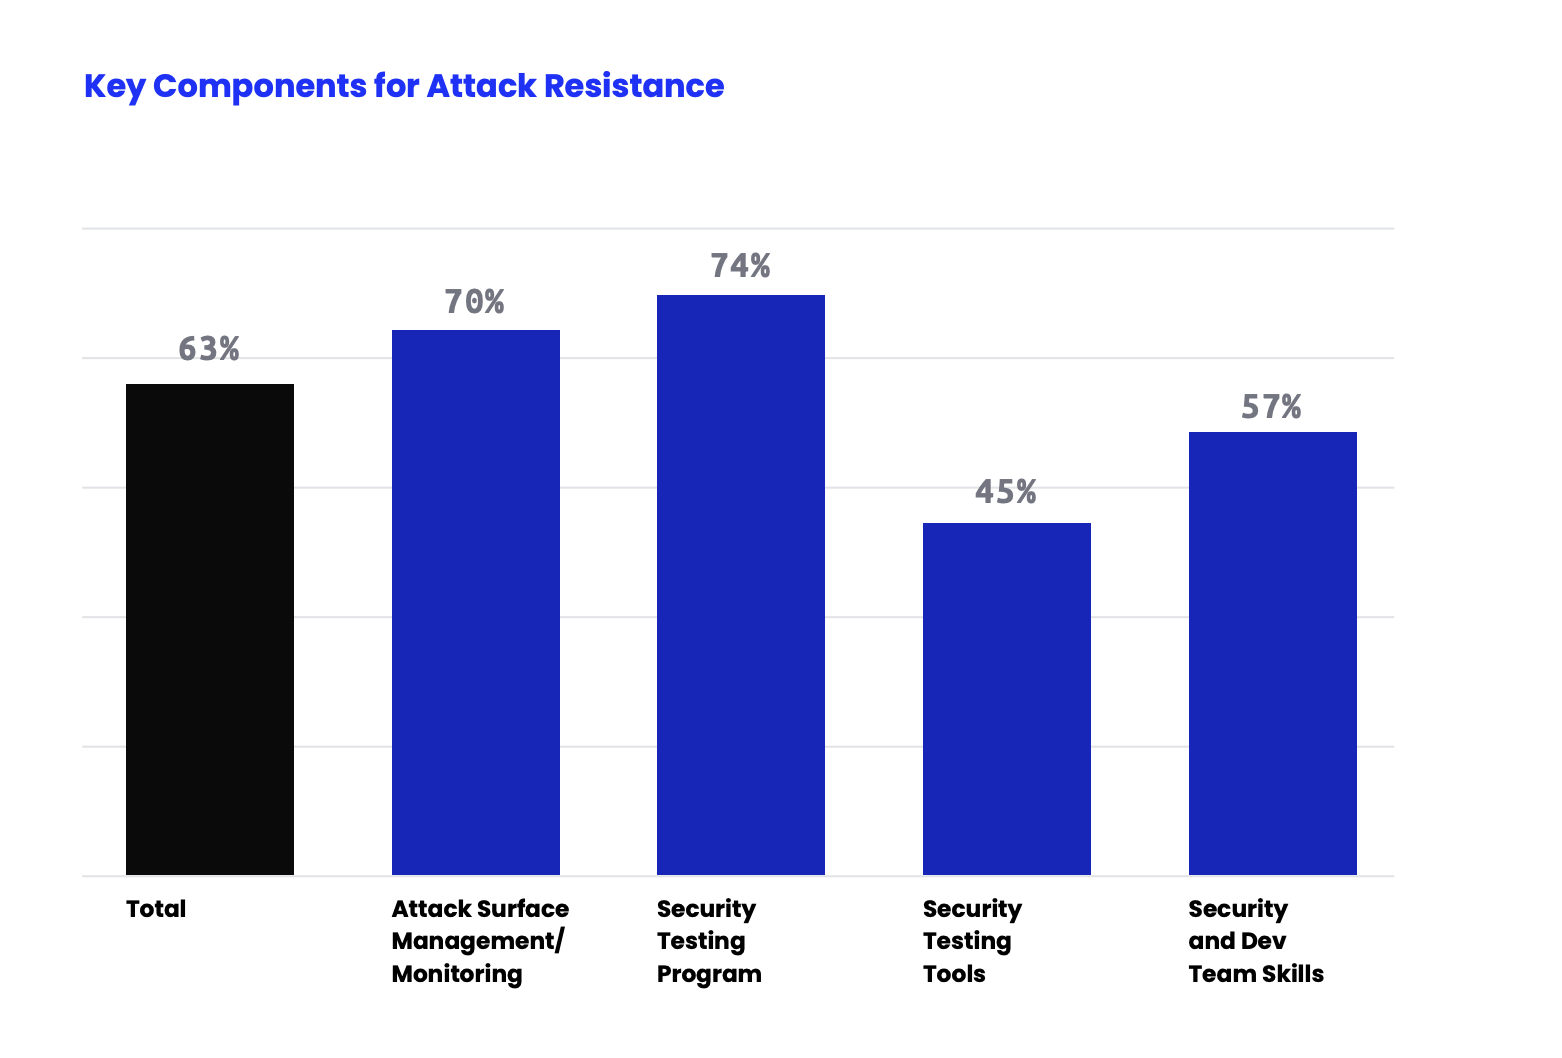 Organizations’ total attack resistance includes these four components.